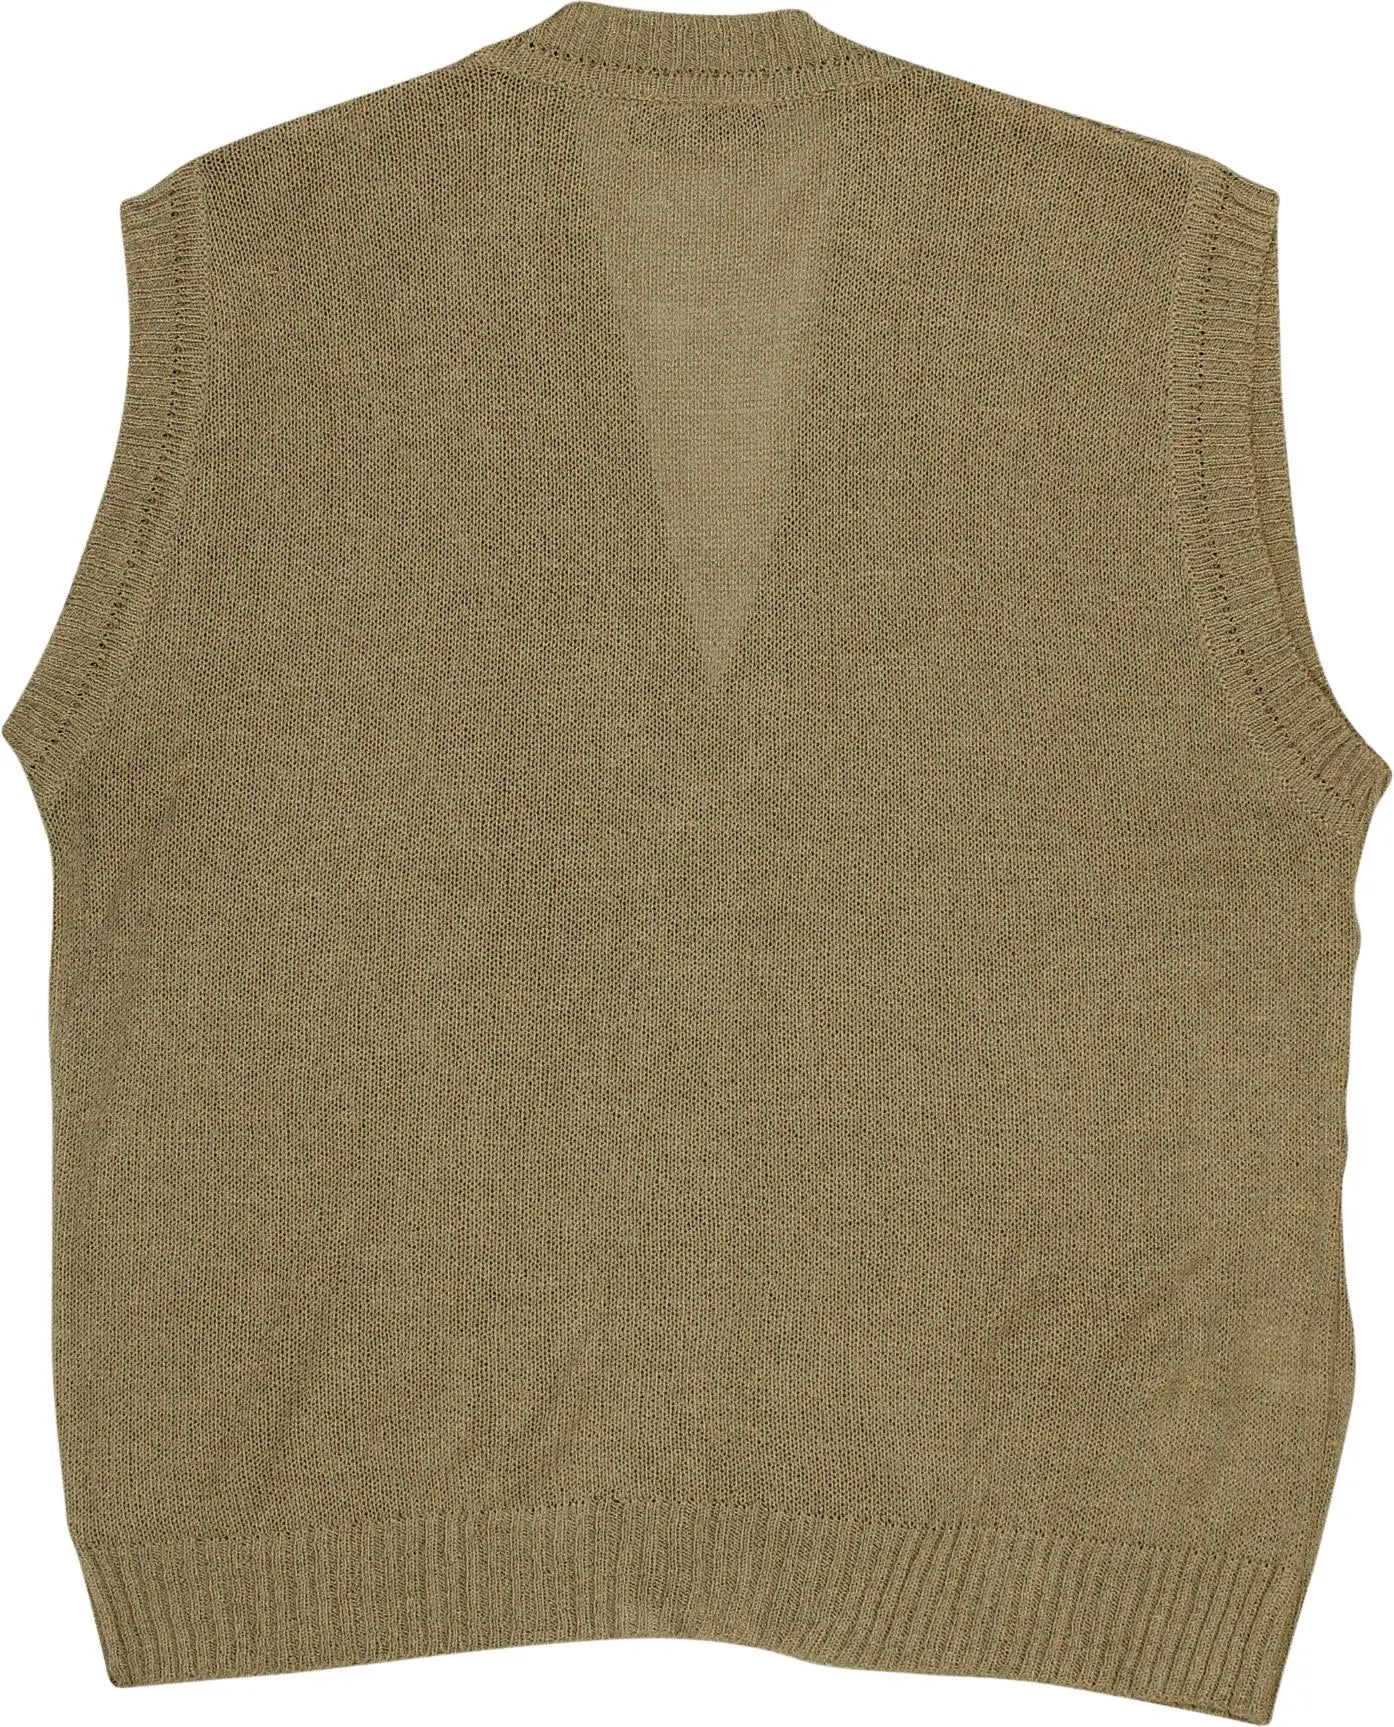 Match Set - Knitted Vest- ThriftTale.com - Vintage and second handclothing